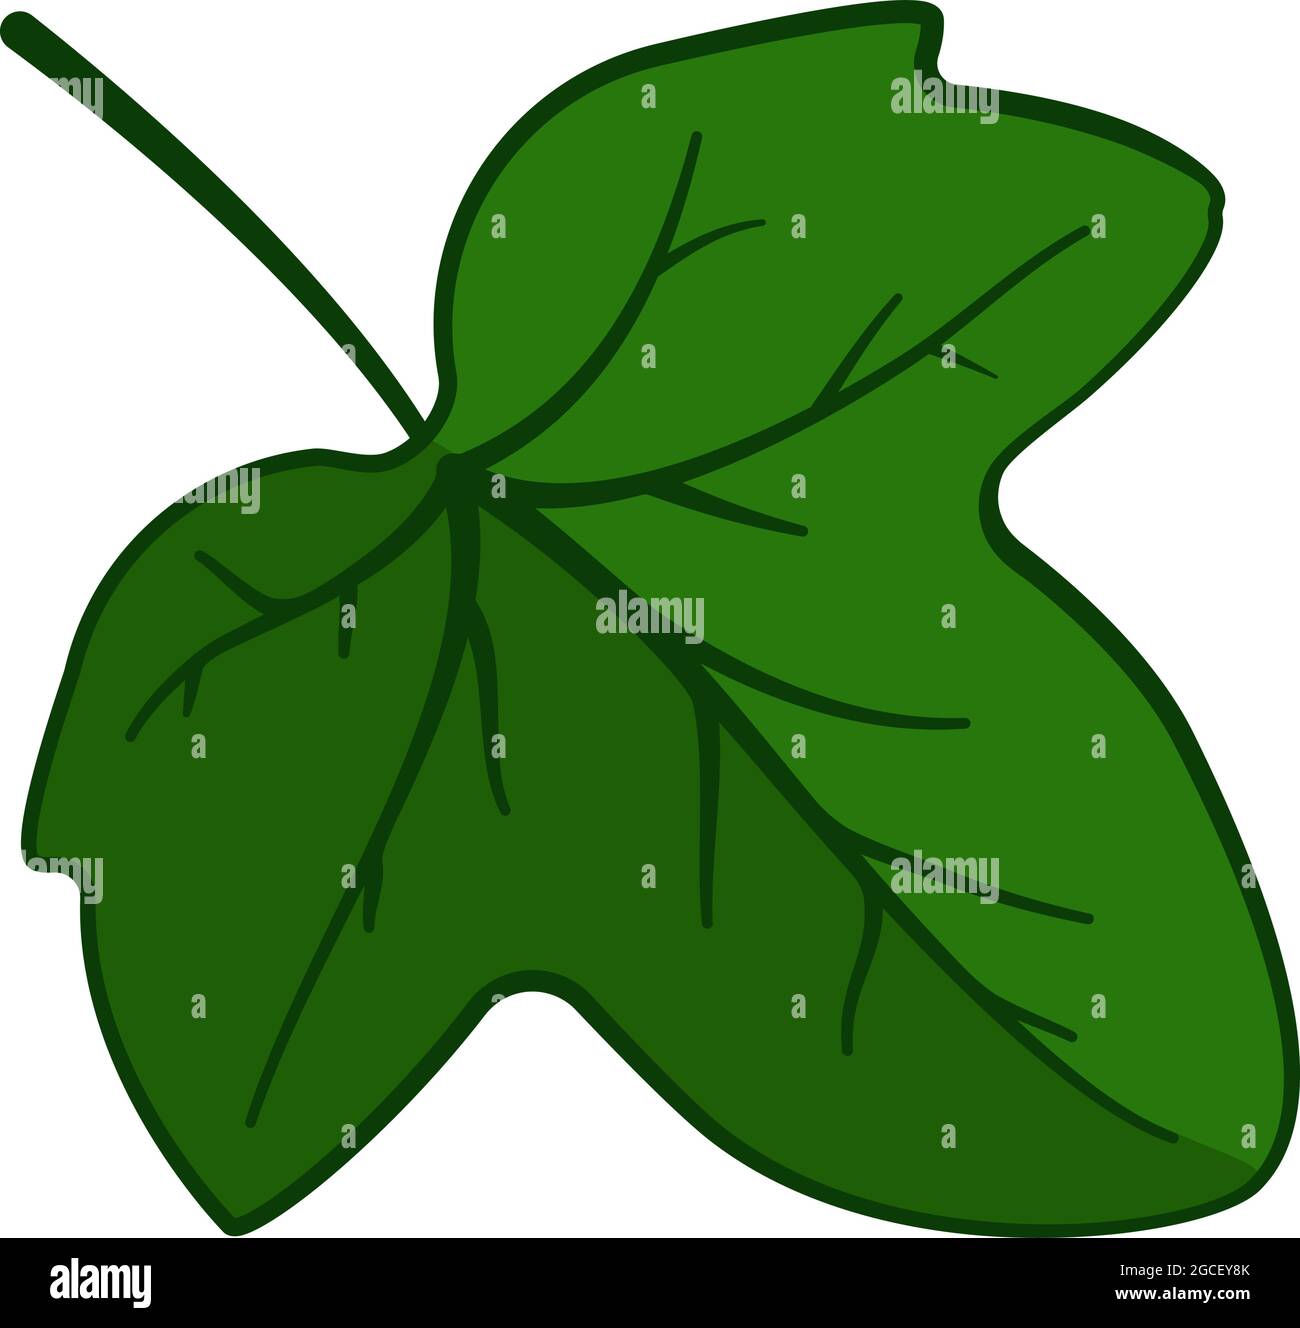 Ivy Leaf Cliparts, Stock Vector and Royalty Free Ivy Leaf Illustrations